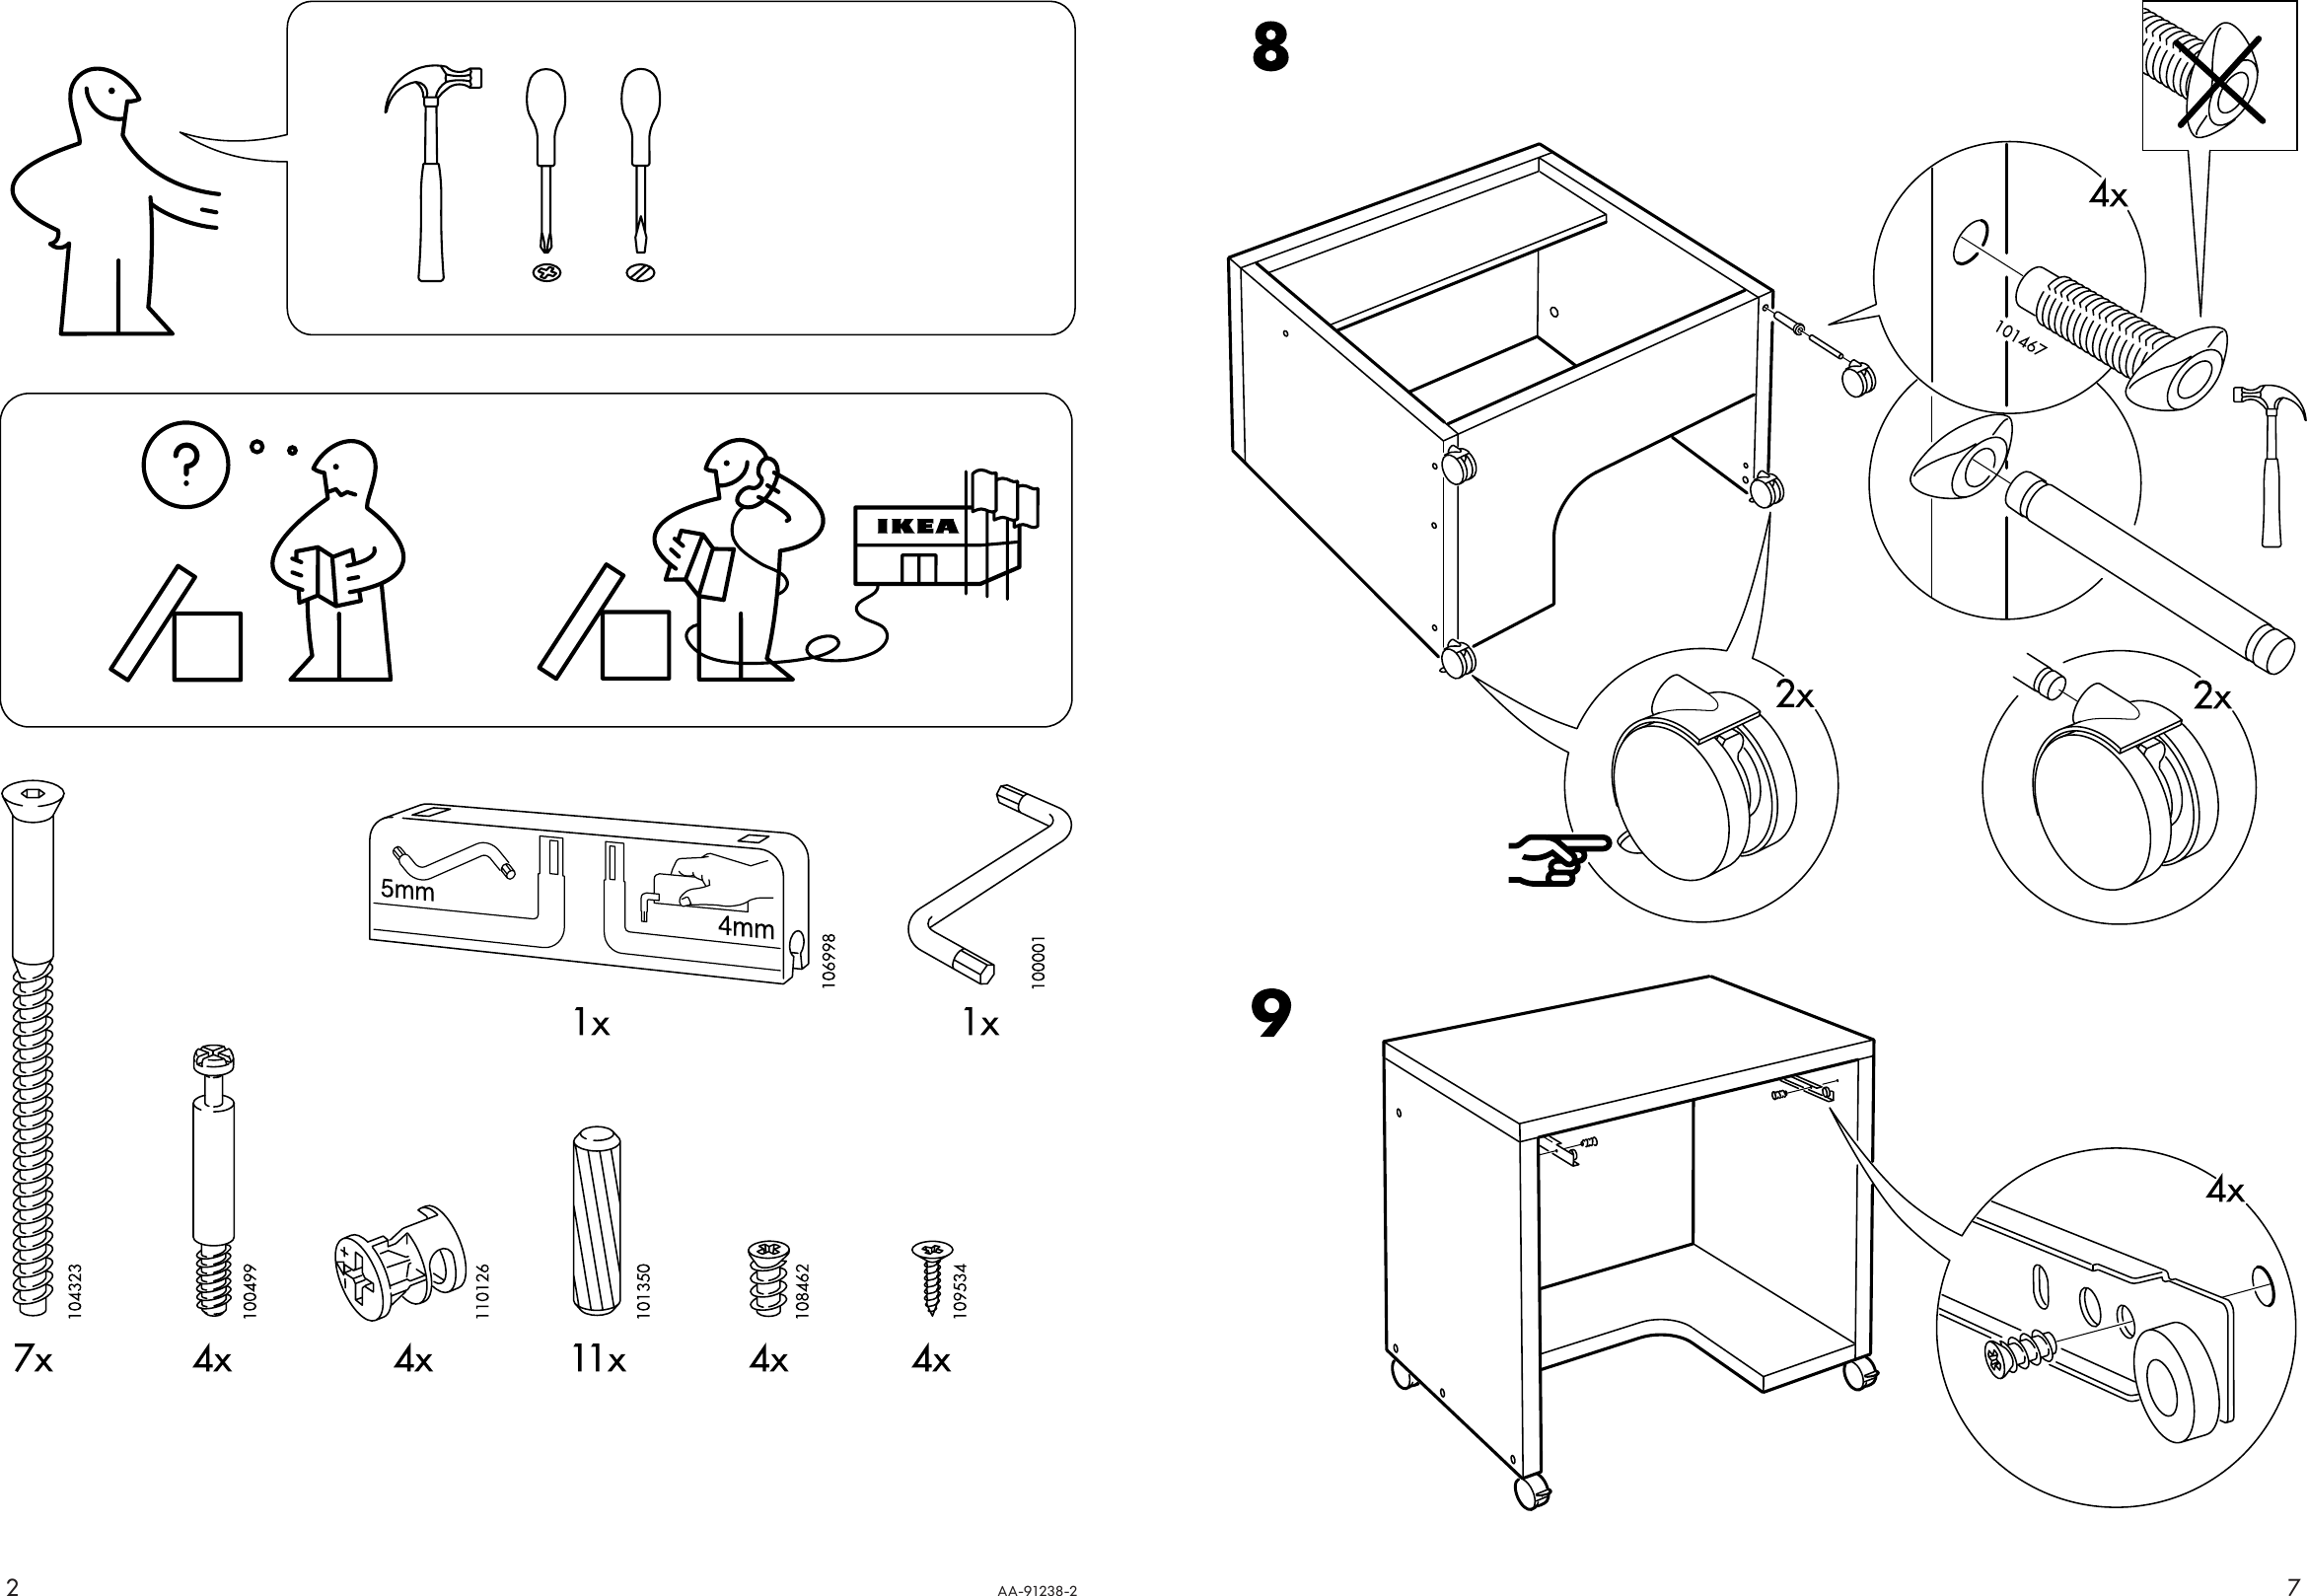 Ikea Mikael Computer Table W Casters 30x20 Assembly Instruction 6